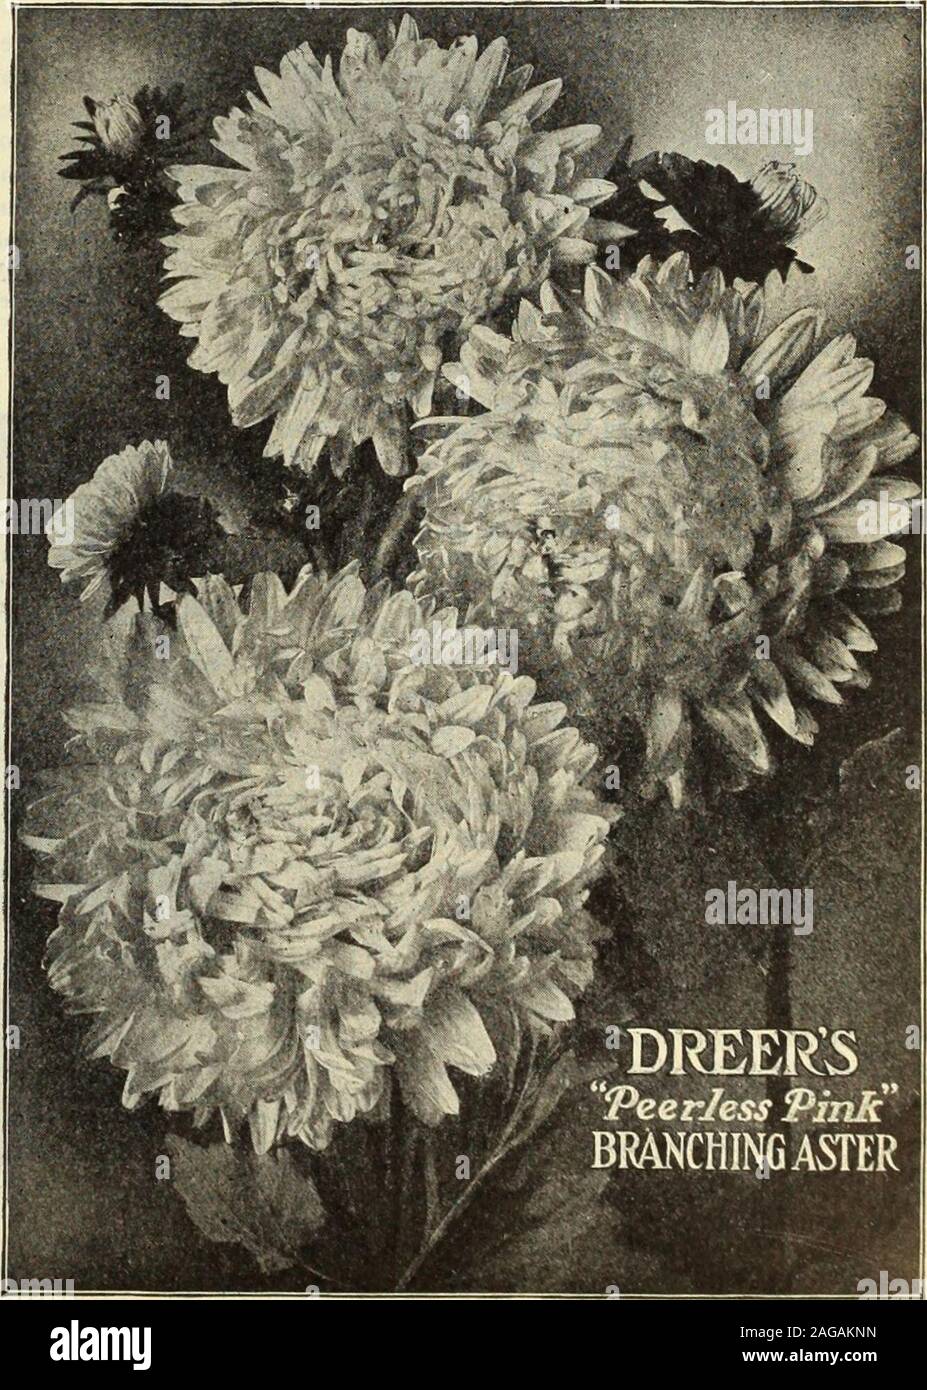 . Dreer's 1913 garden book. tember, or a trifle earlierthan the late-branching sorts. Reportsreceived regarding it, both from thiscountry and Europe, speak in the high-est terms of its many good qualities. 15cts. per packet; 2 packets for 25 cts. DREERS LARGE-FLOWERINGHALF-DWARF SNAPDRAGONS. (Antirrhinum Majus Nanum Grandiflorum.) This type, while not having the magnificent long spikes of thegiant sorts, has spikes and flowers of good size, and, owing totheir dwarf and compact habit of growth, are better adaptedfor bedding purposes. They grow about 18 inches high, andthe mass of bloom which th Stock Photo